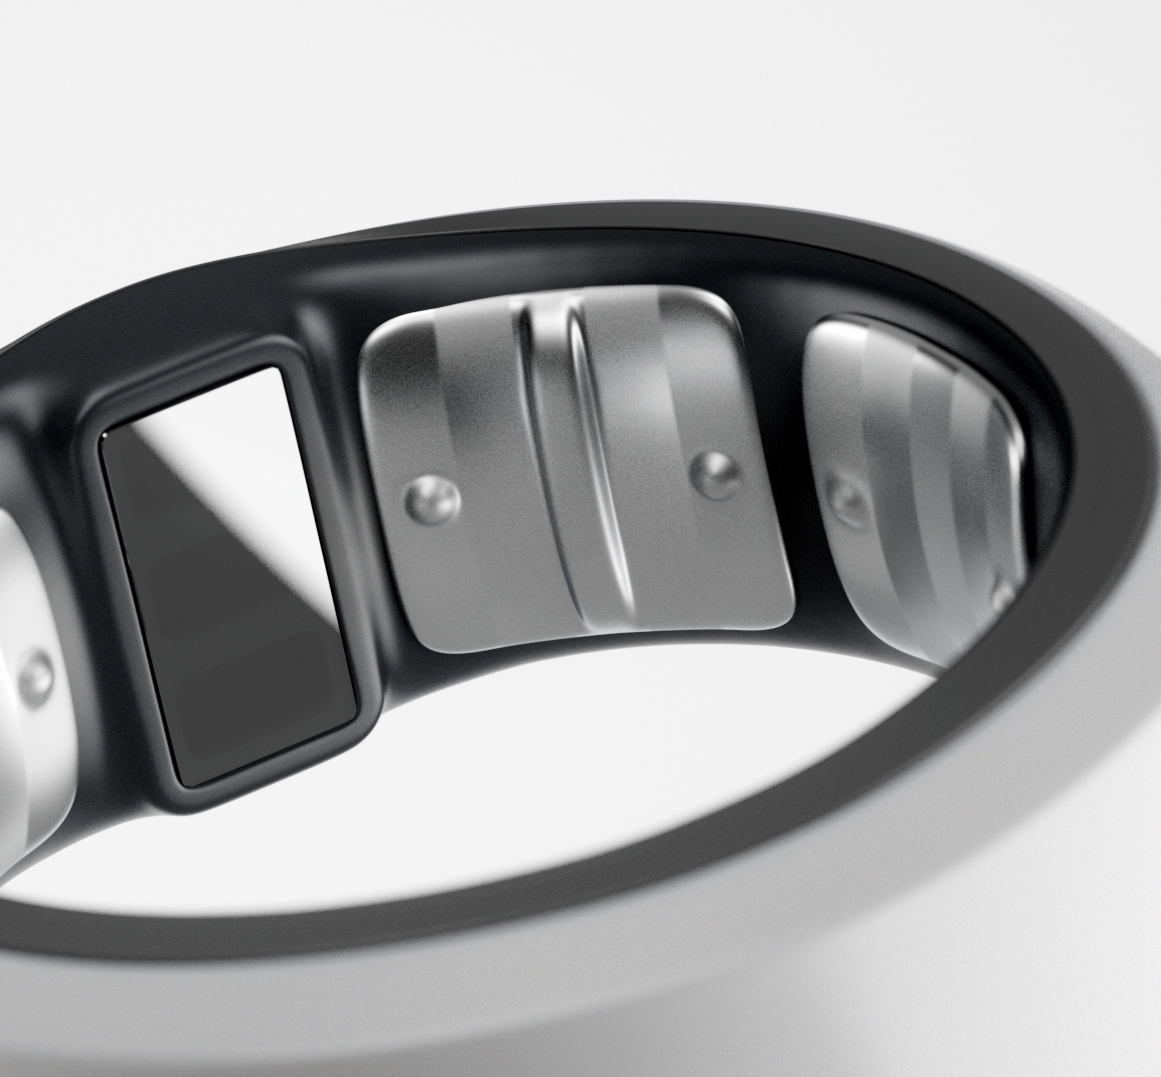 Tinder founder’s latest play is a ring for quantifying mental health